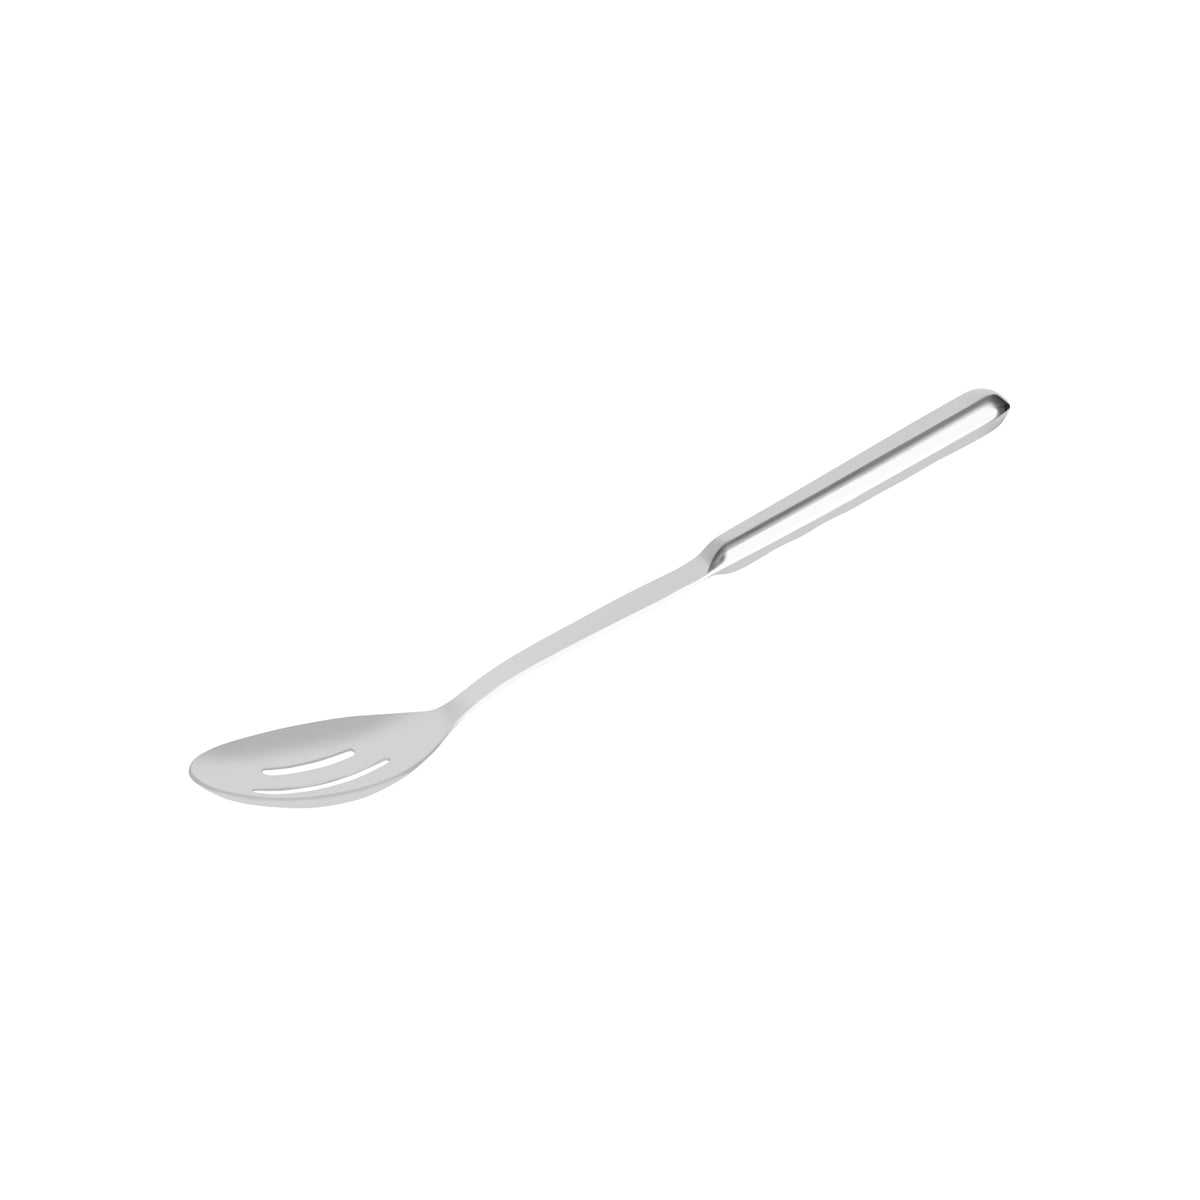 '03599 Chef Inox Salad Spoon Slotted Stainless Steel Hollow Handle 306mm Tomkin Australia Hospitality Supplies